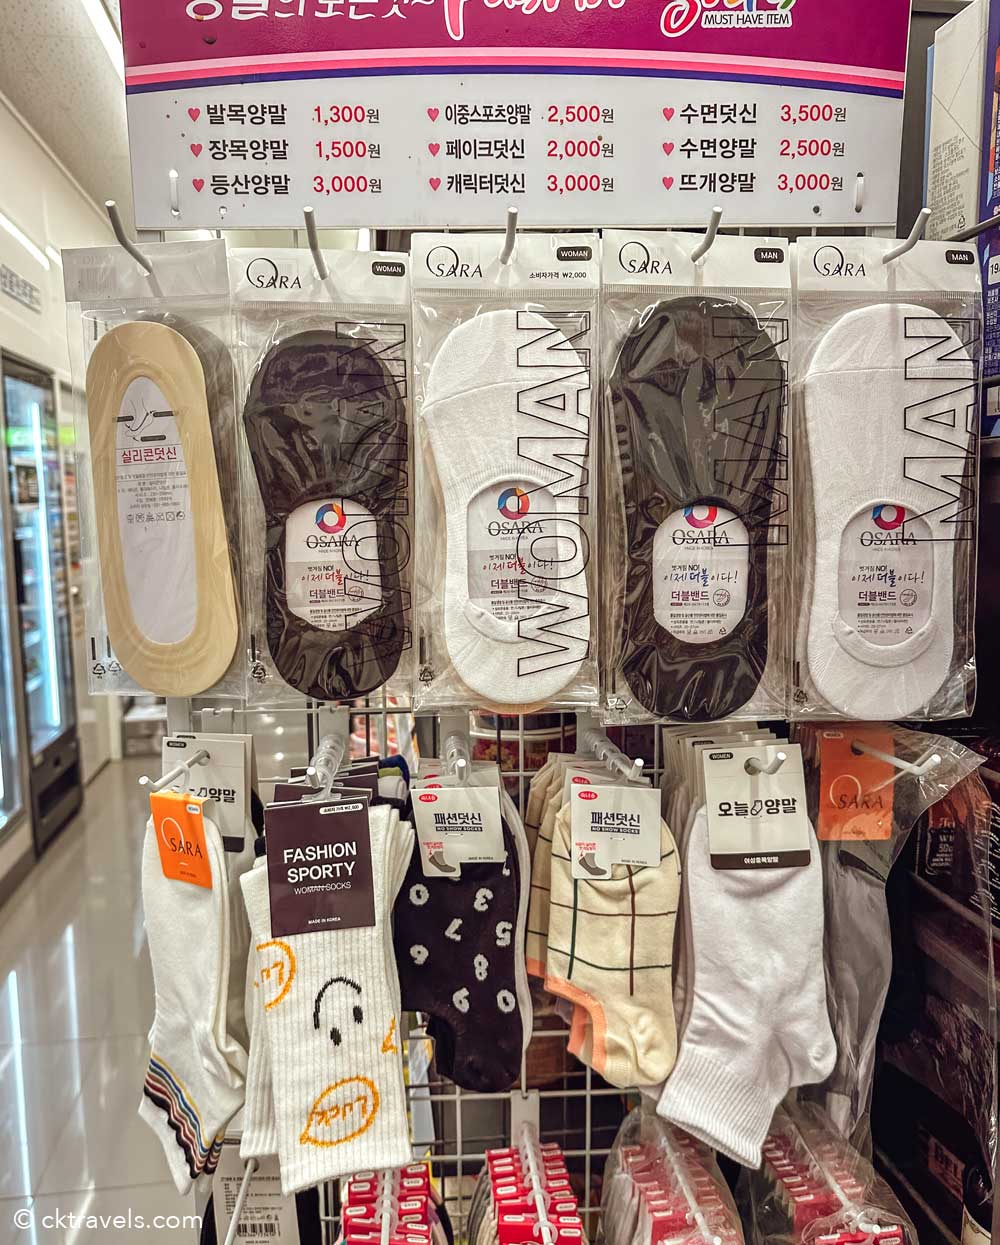 socks from CU convenience stores in South Korea